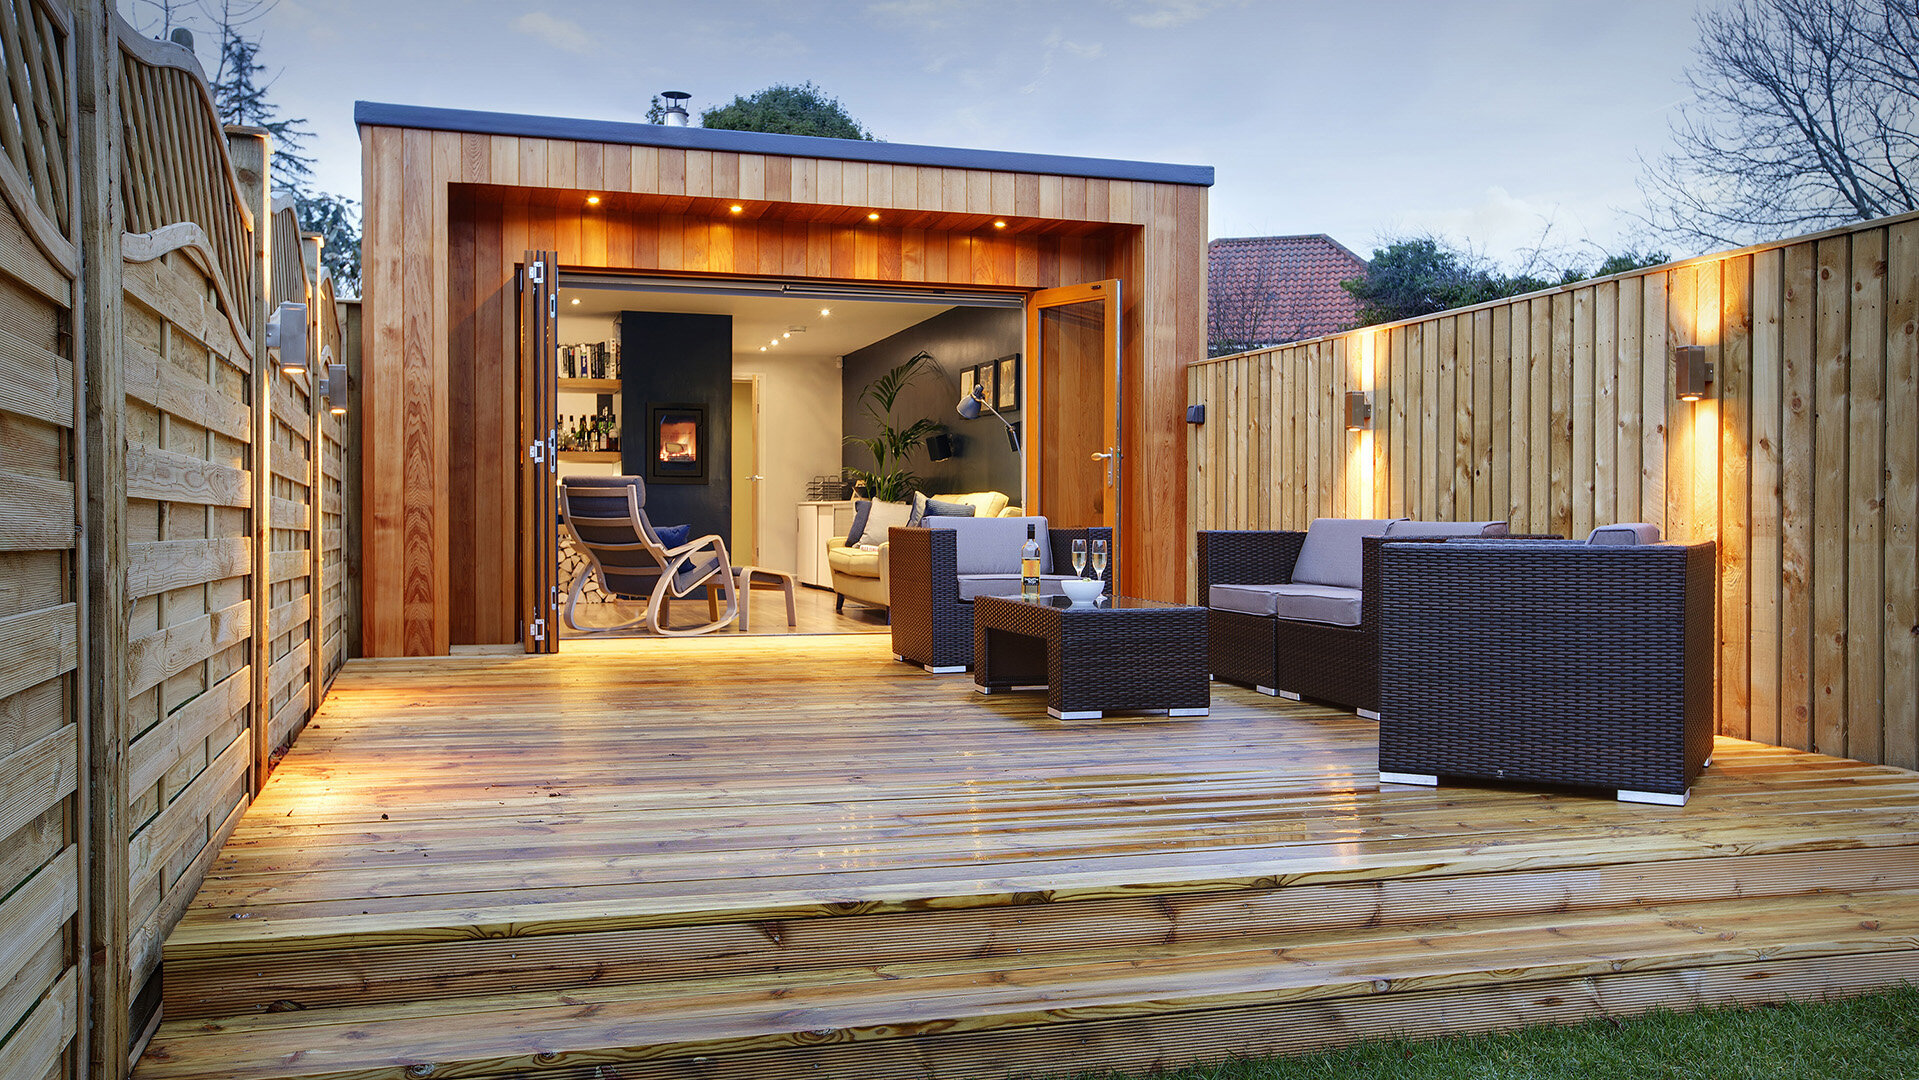 Locally sourced, timber clad studio in Beverley, East Yorkshire